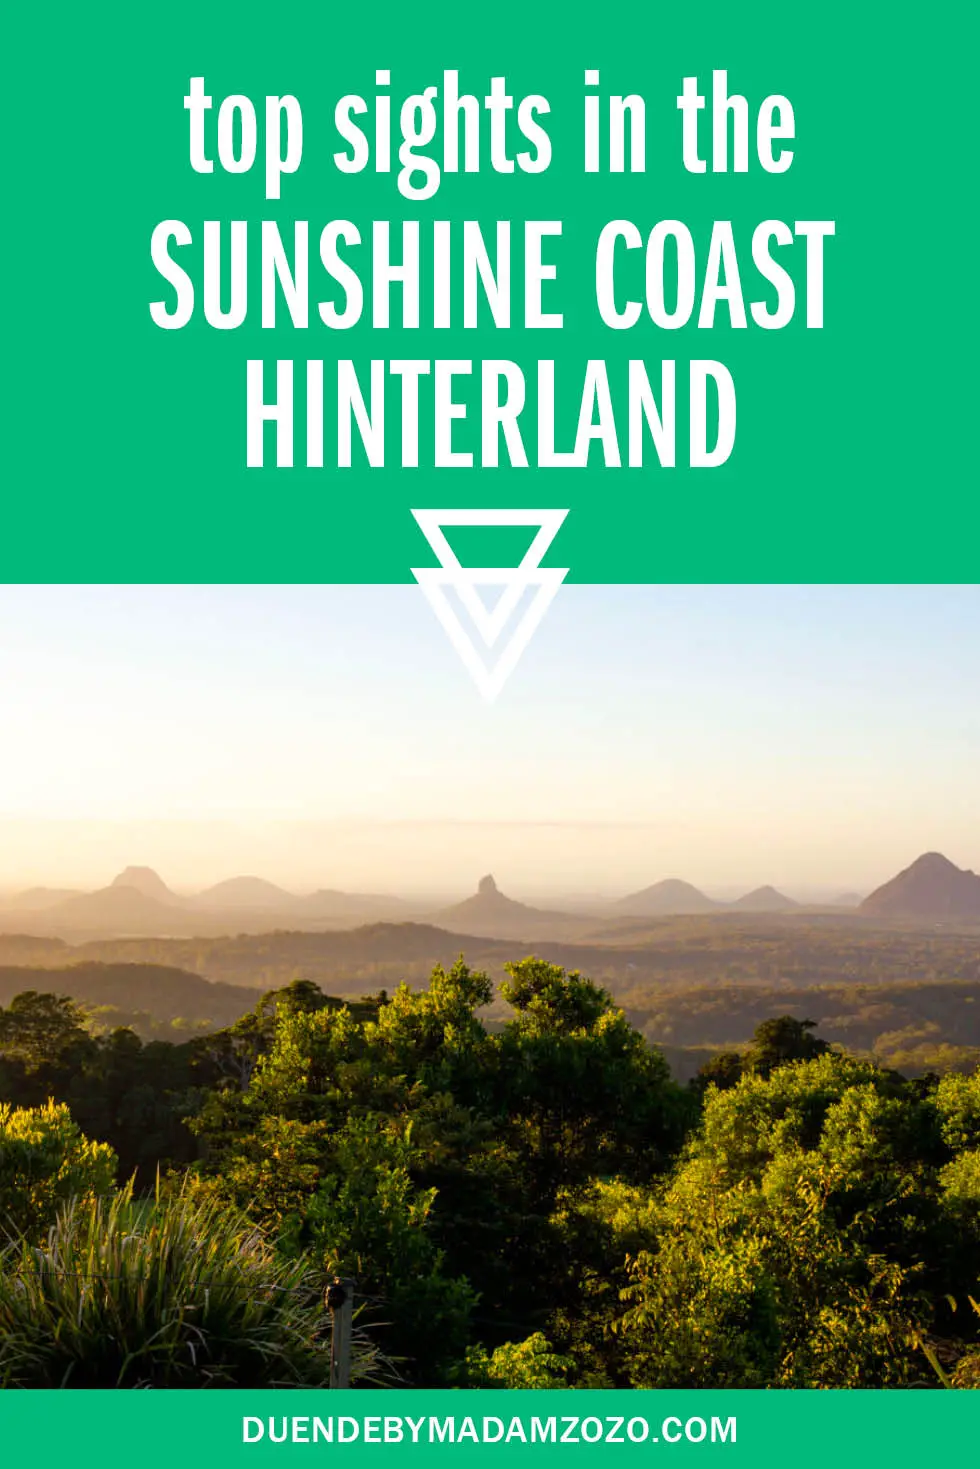 Image of sunrise over volcanic mountains with text reading "top sights in the Sunshine Coast Hinterland"